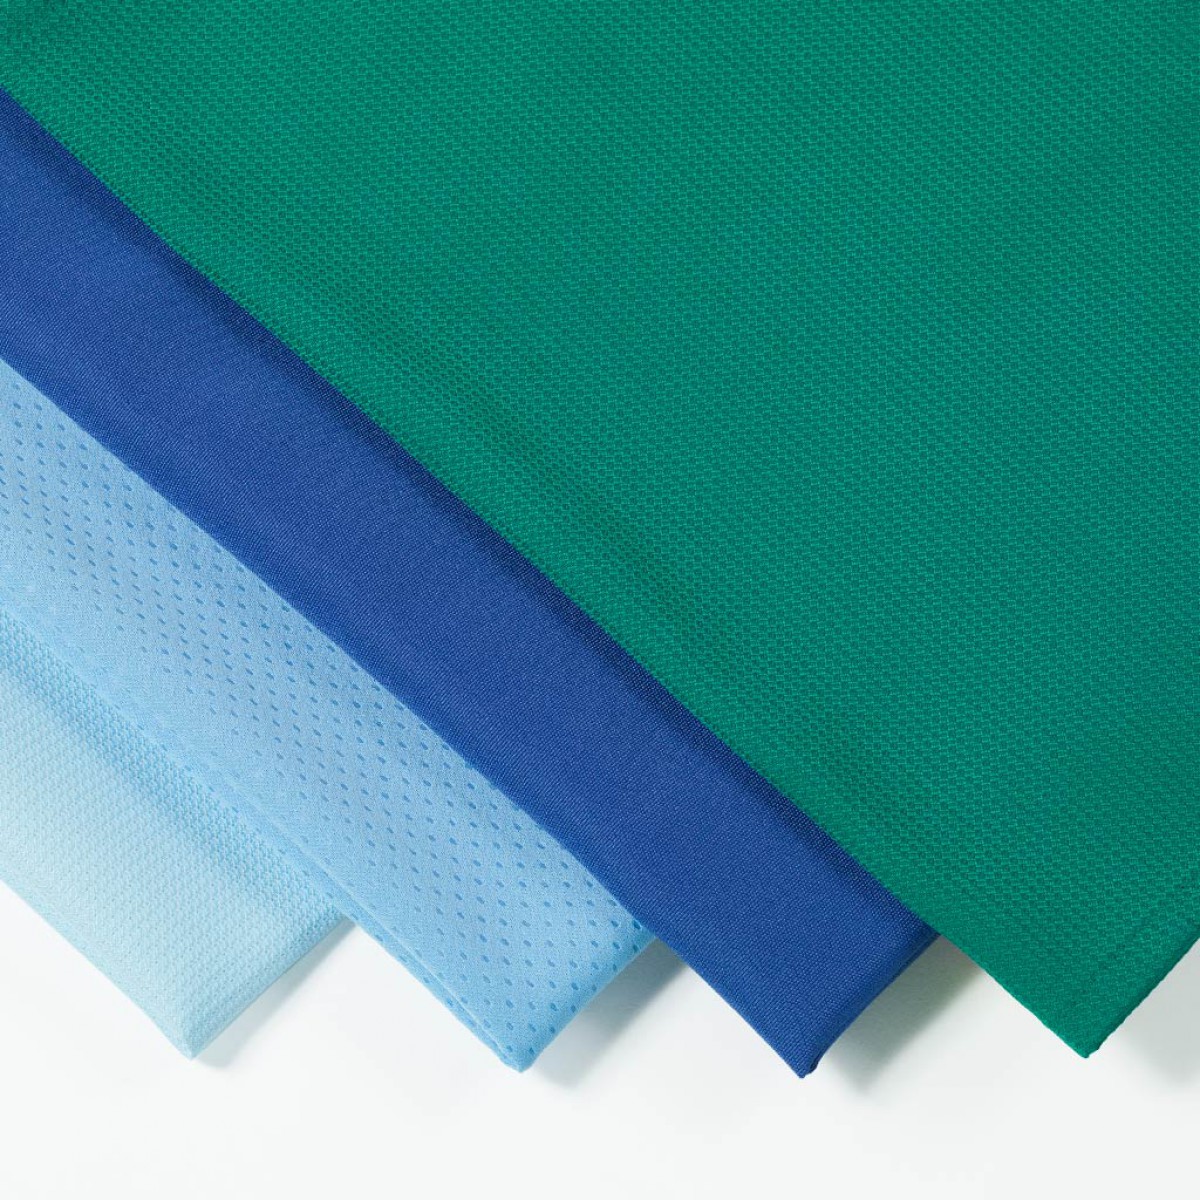 Pluritex - Surgical Drapes - Absorbent fabric